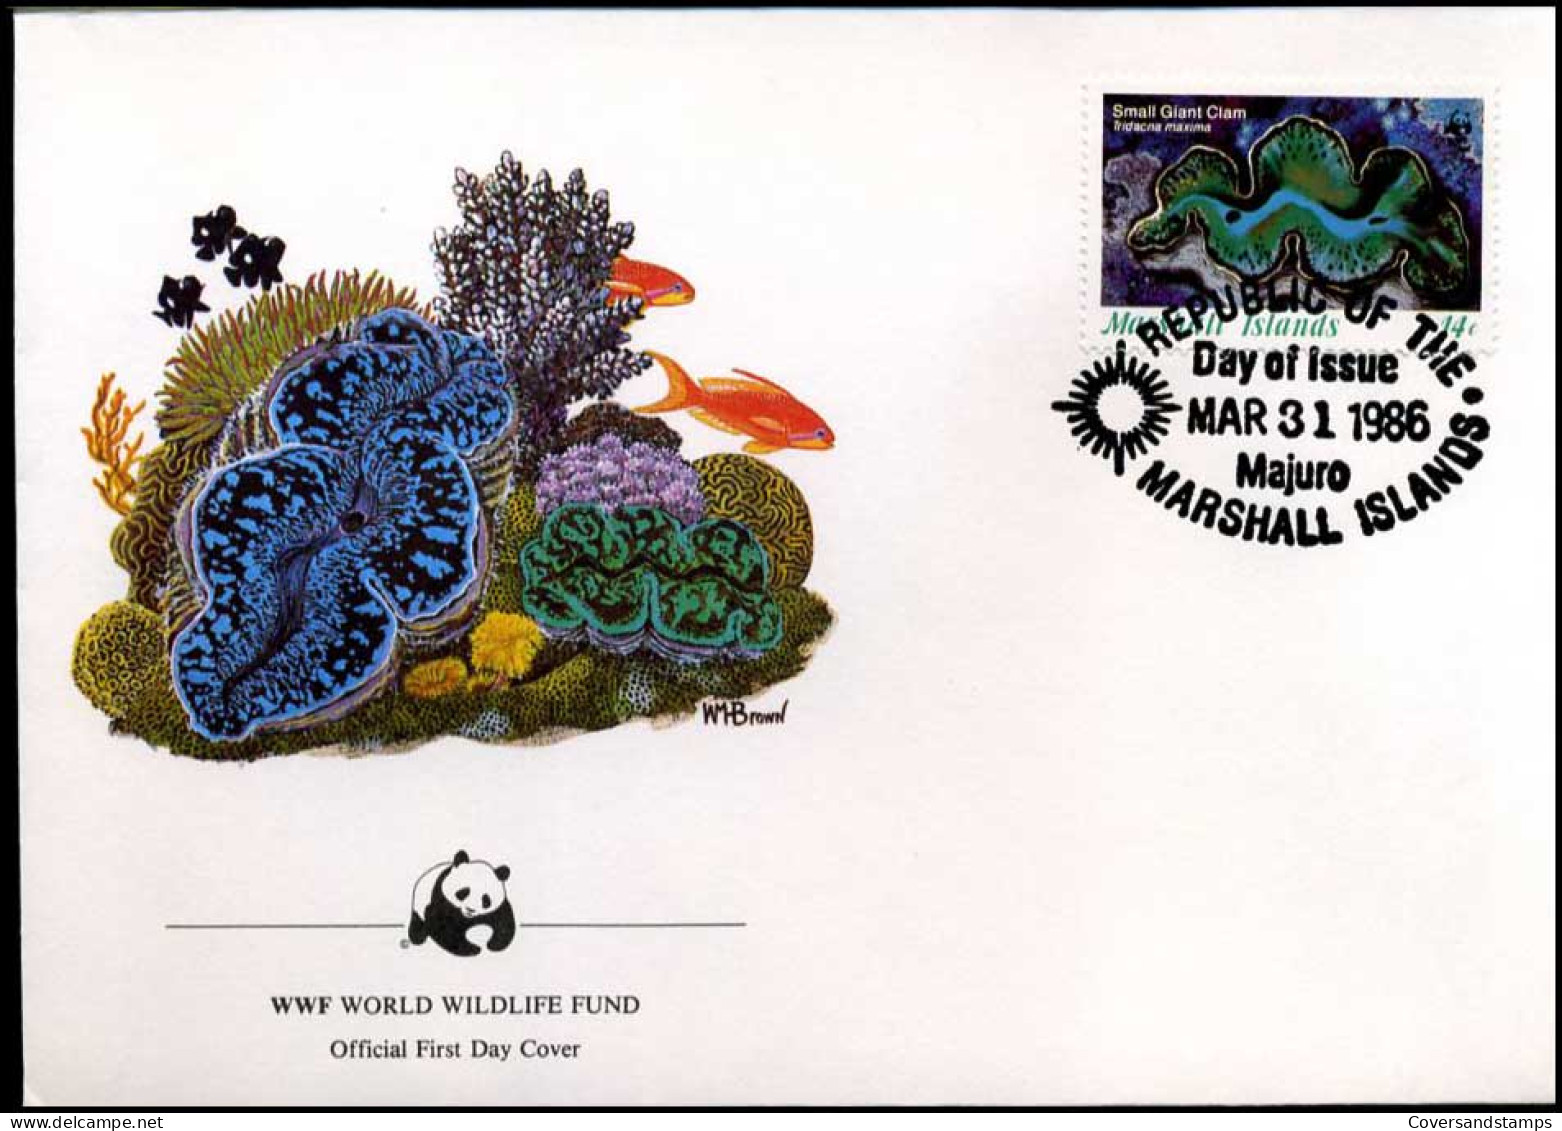 Marshall Islands - FDC - Small Giant Clam - FDC